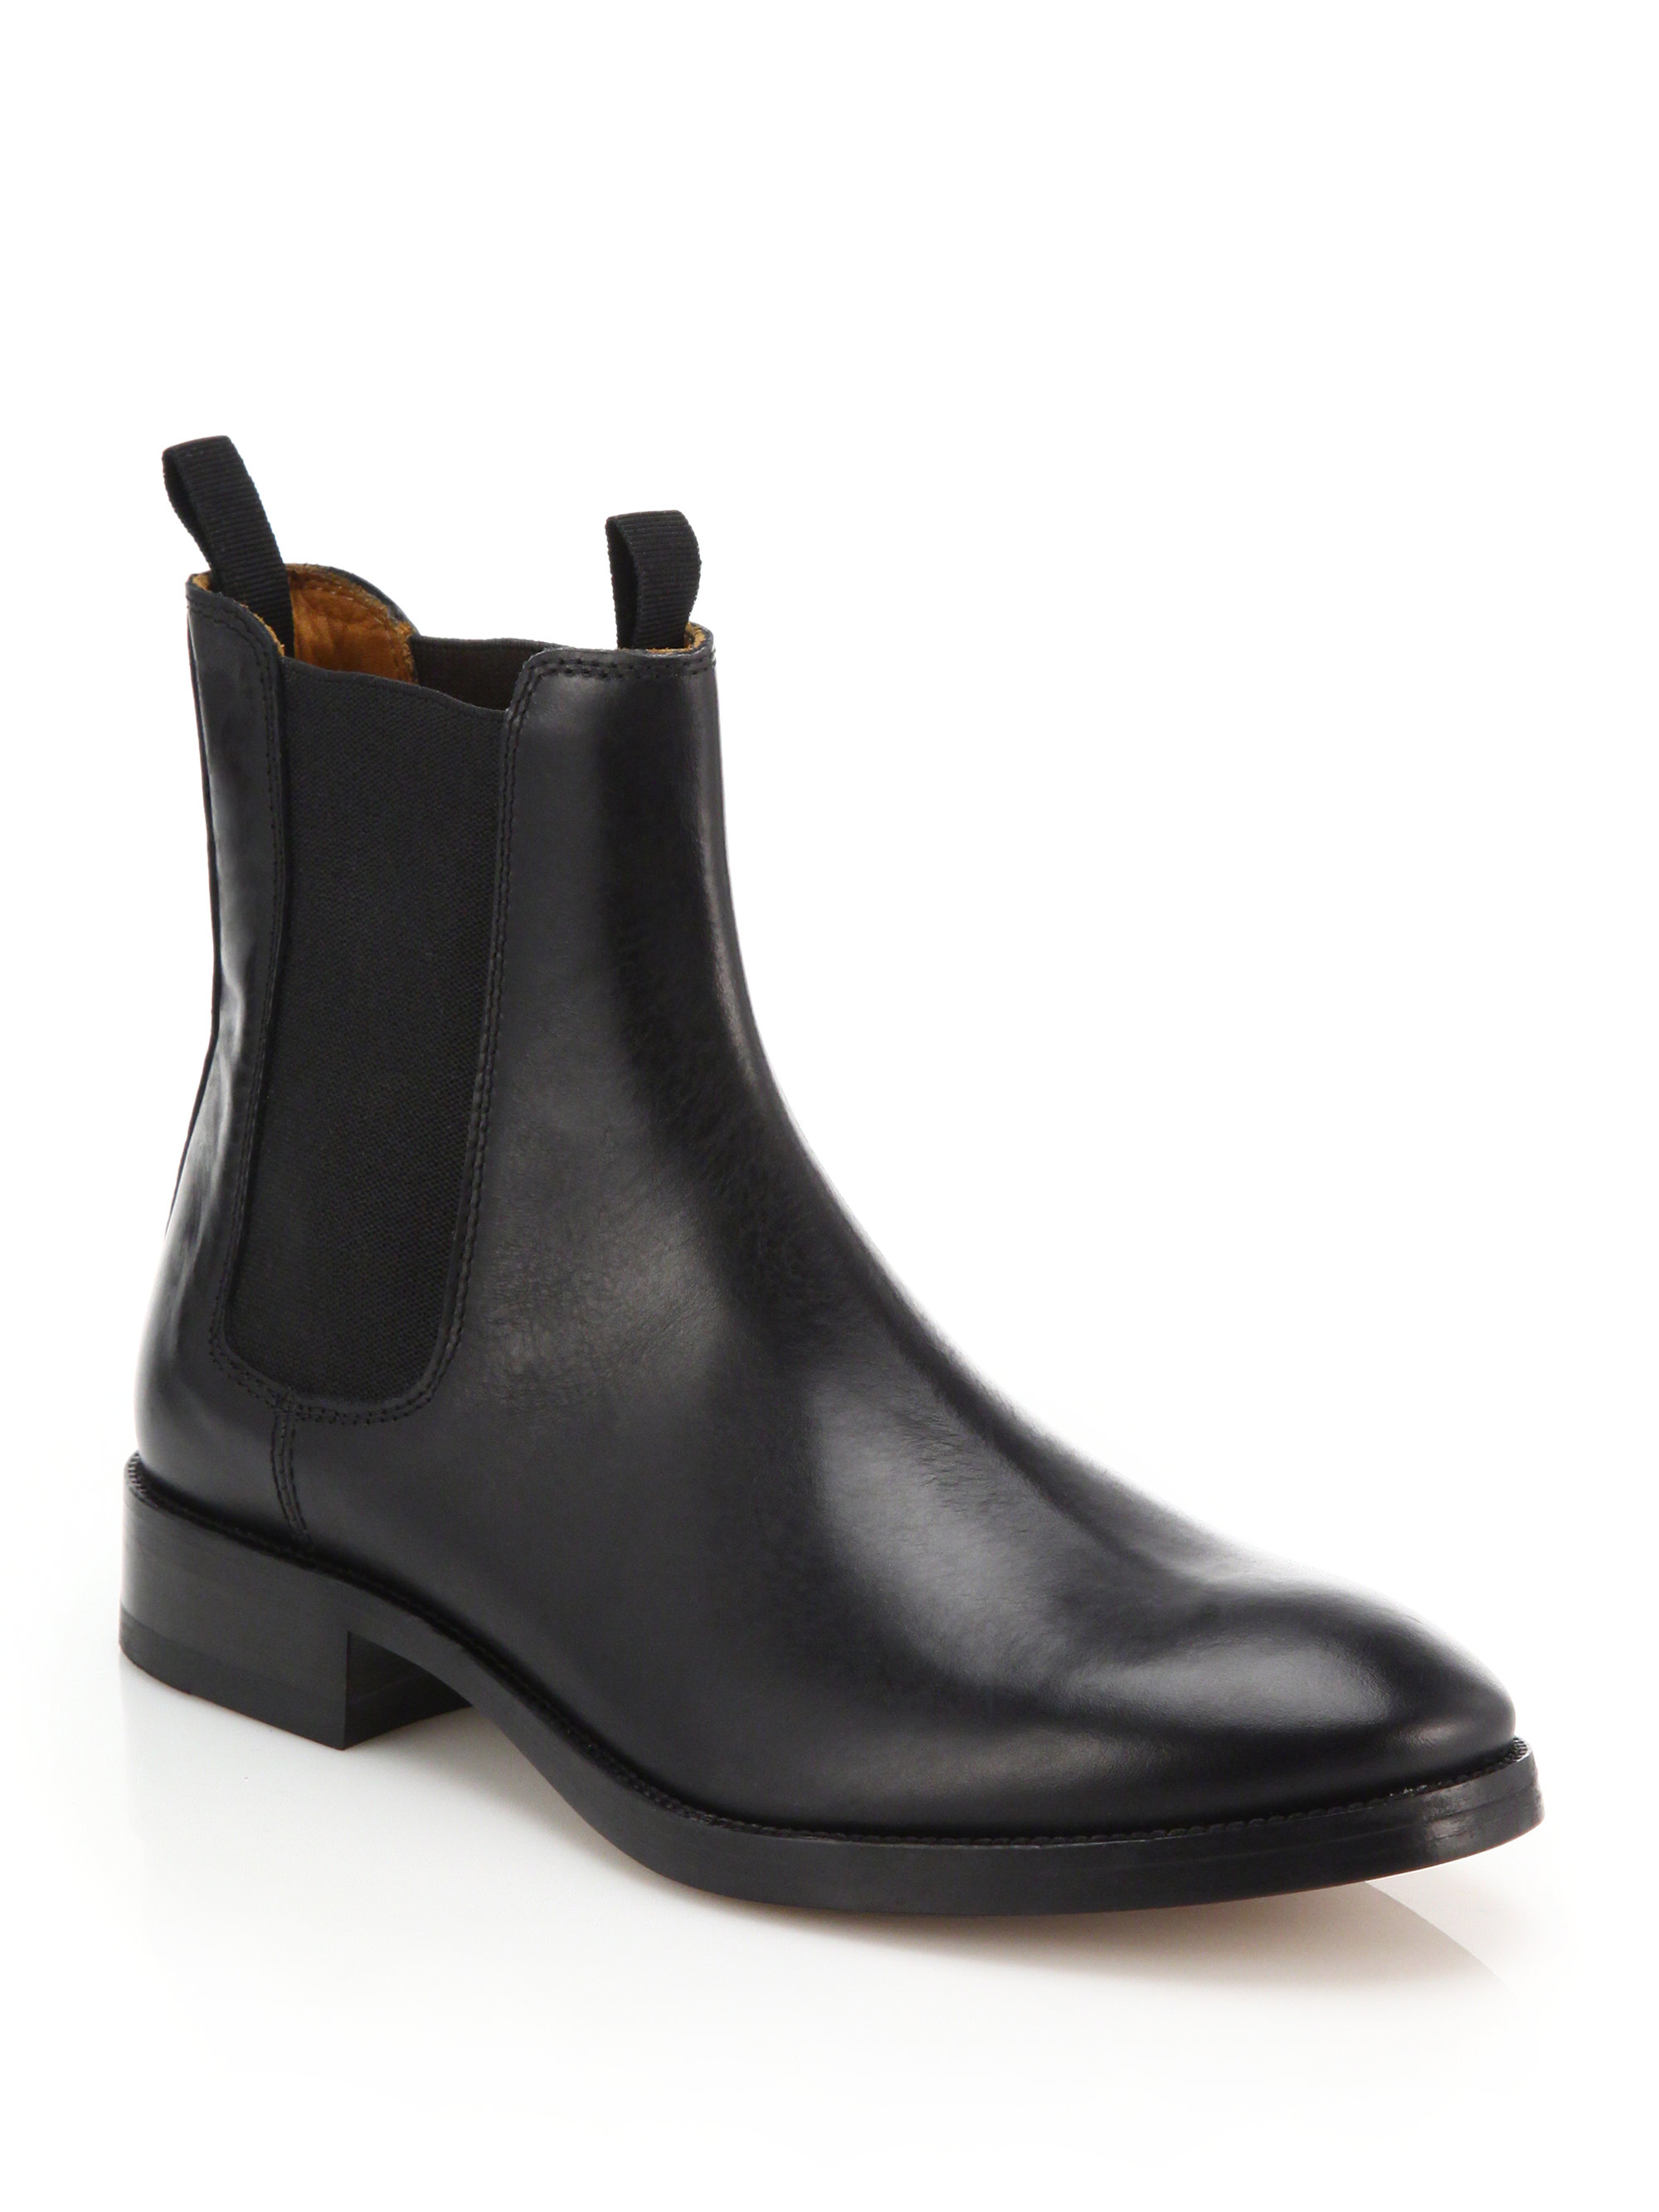 Acne Studios Bess Classic Leather Chelsea Boots in Black - Lyst